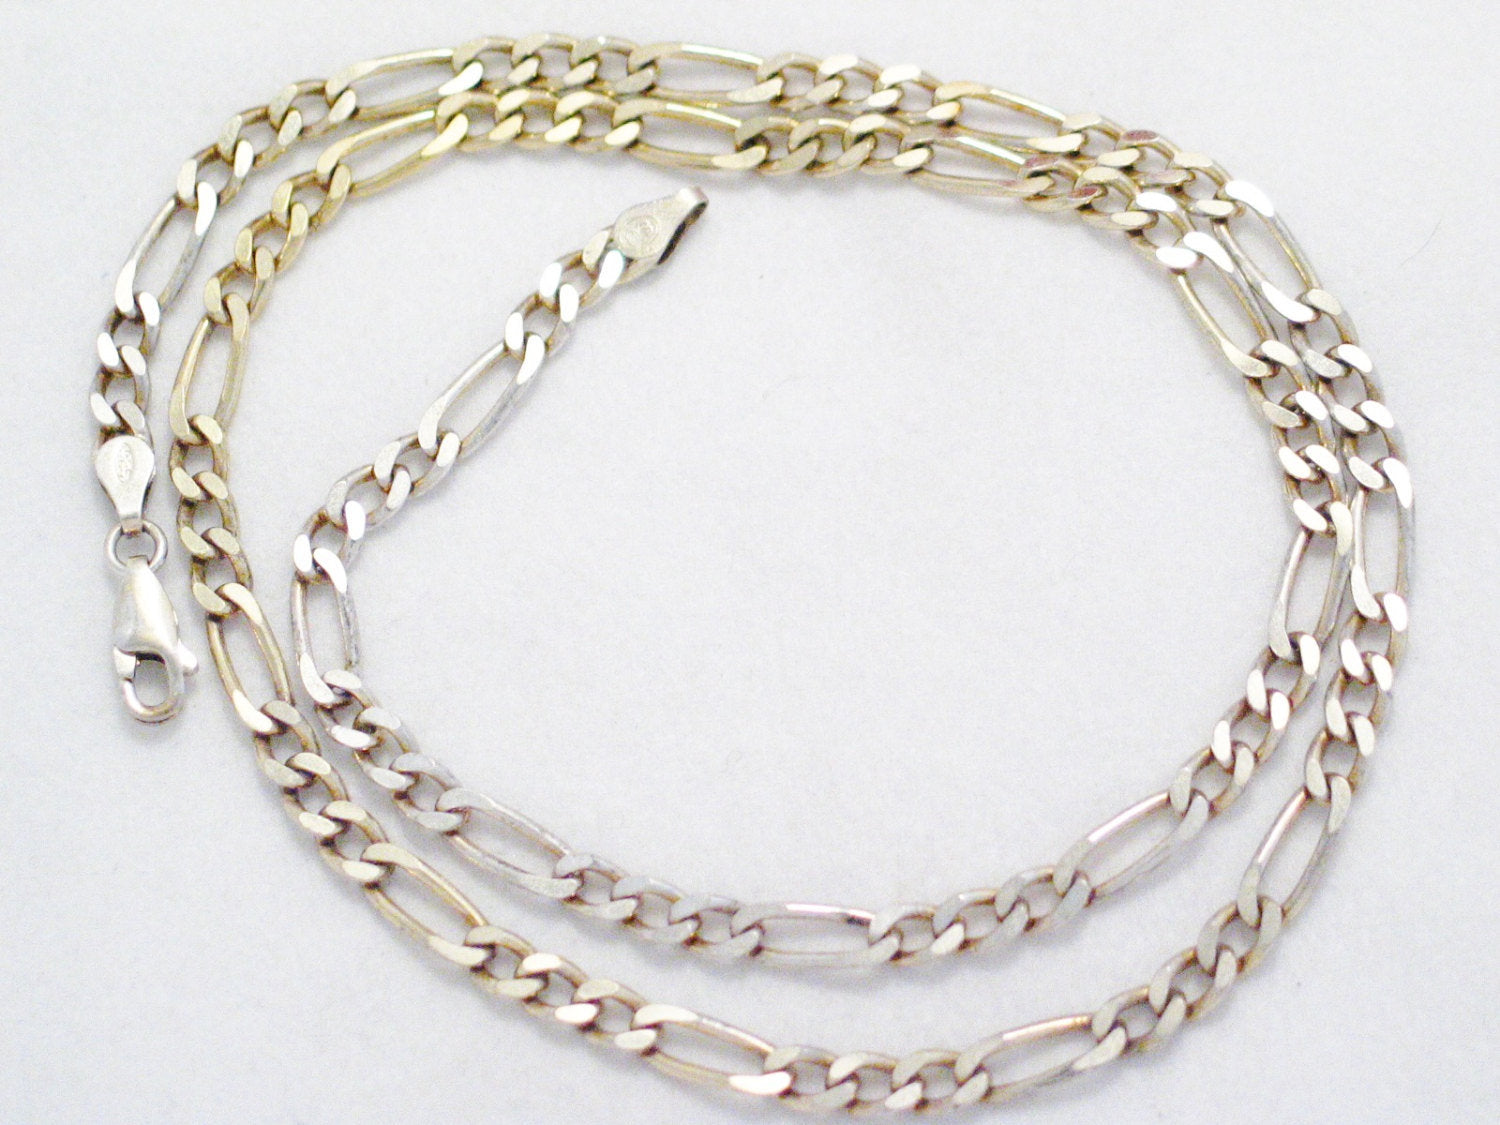 Chain | 20" Sterling Silver 4.5mm Figaro Link Chain Necklace | Necklace